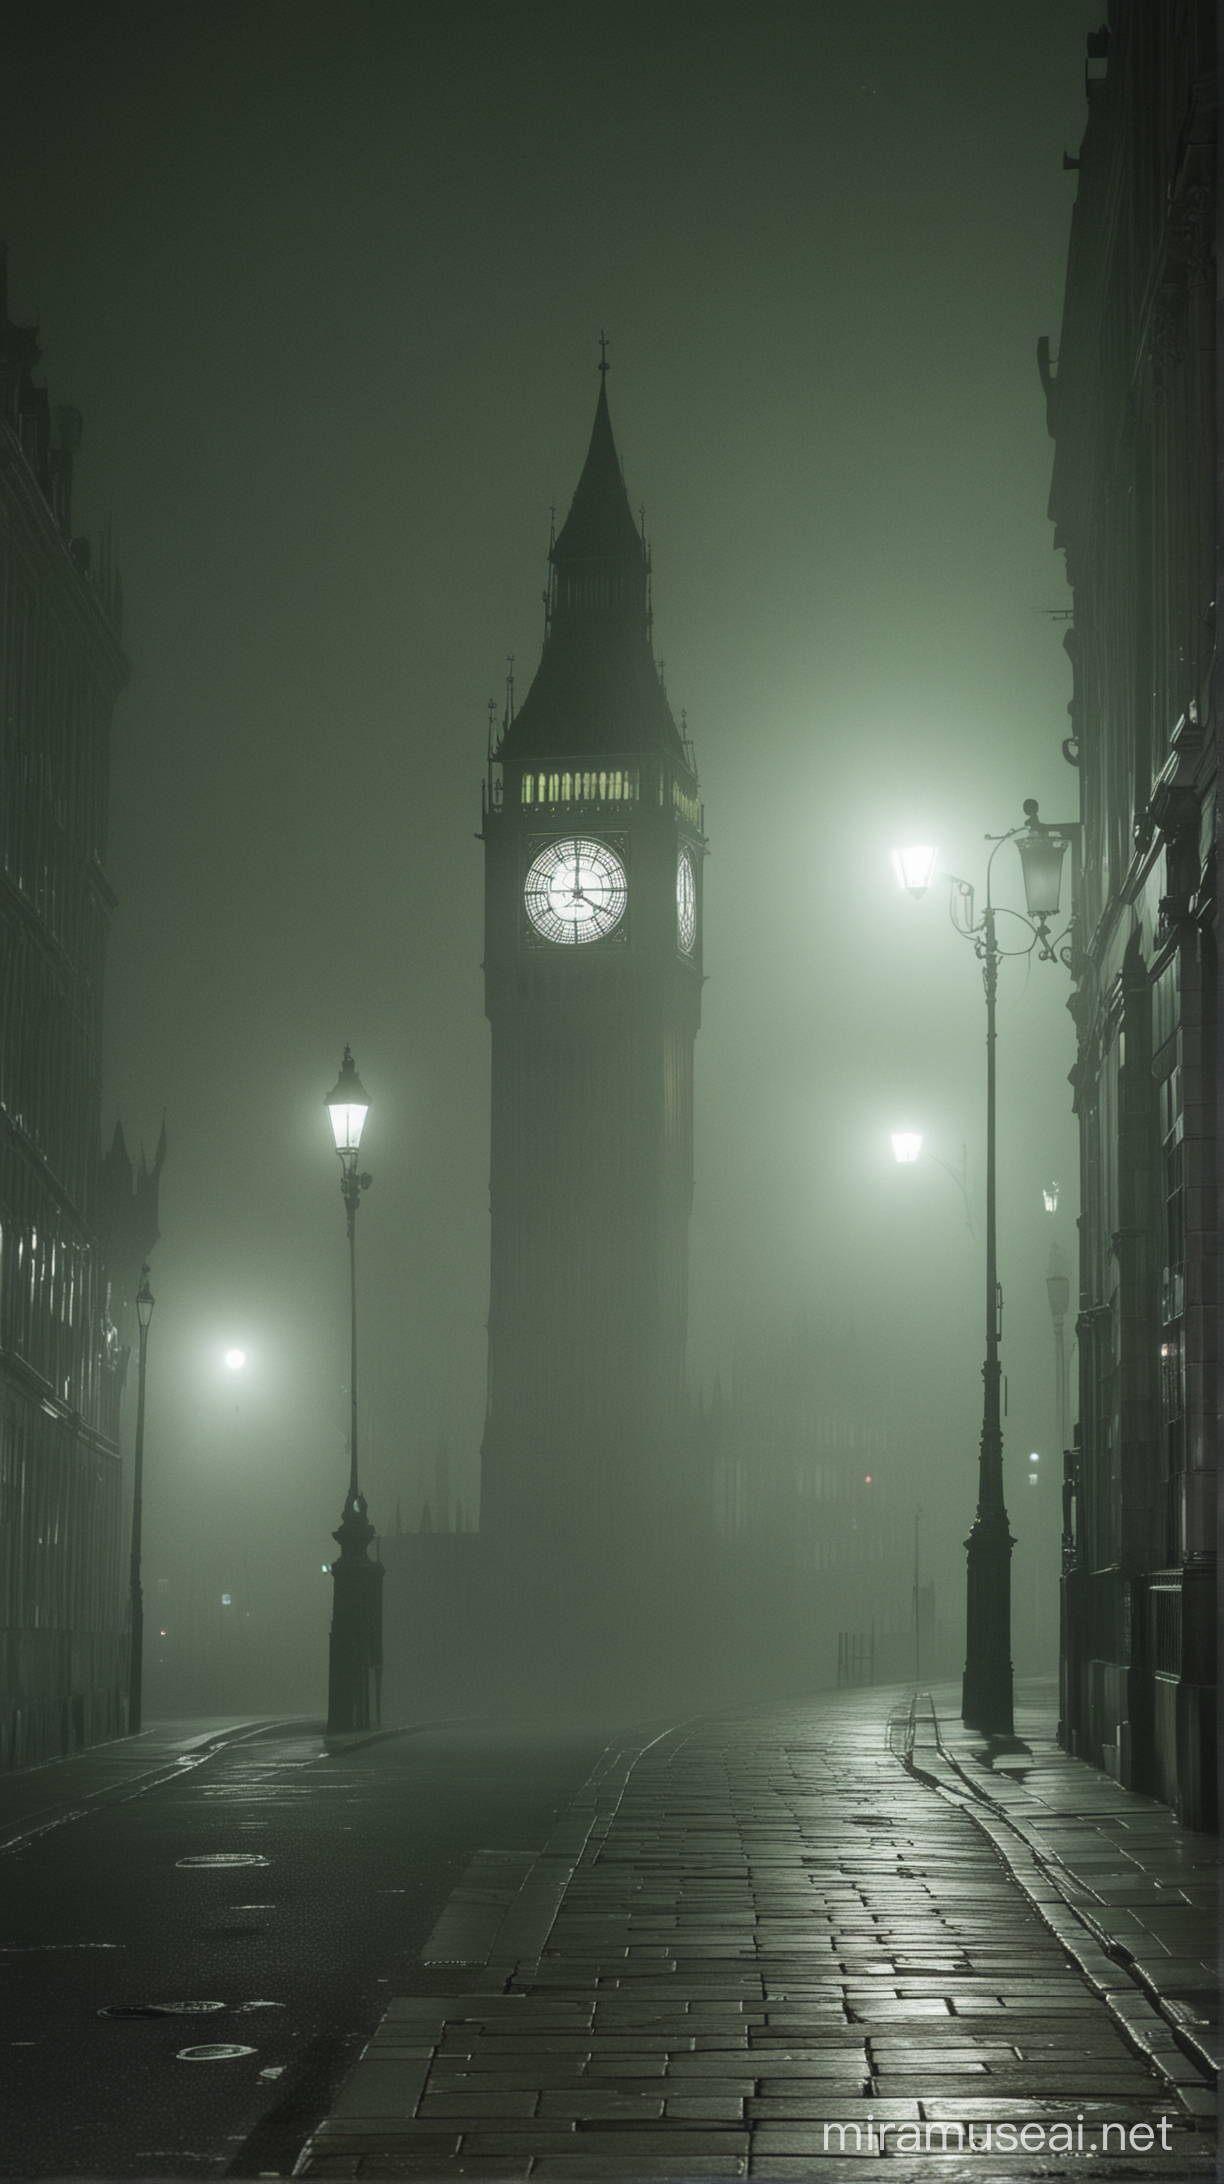 Mysterious 90s London Street with Eerie Fog and Big Ben Silhouette